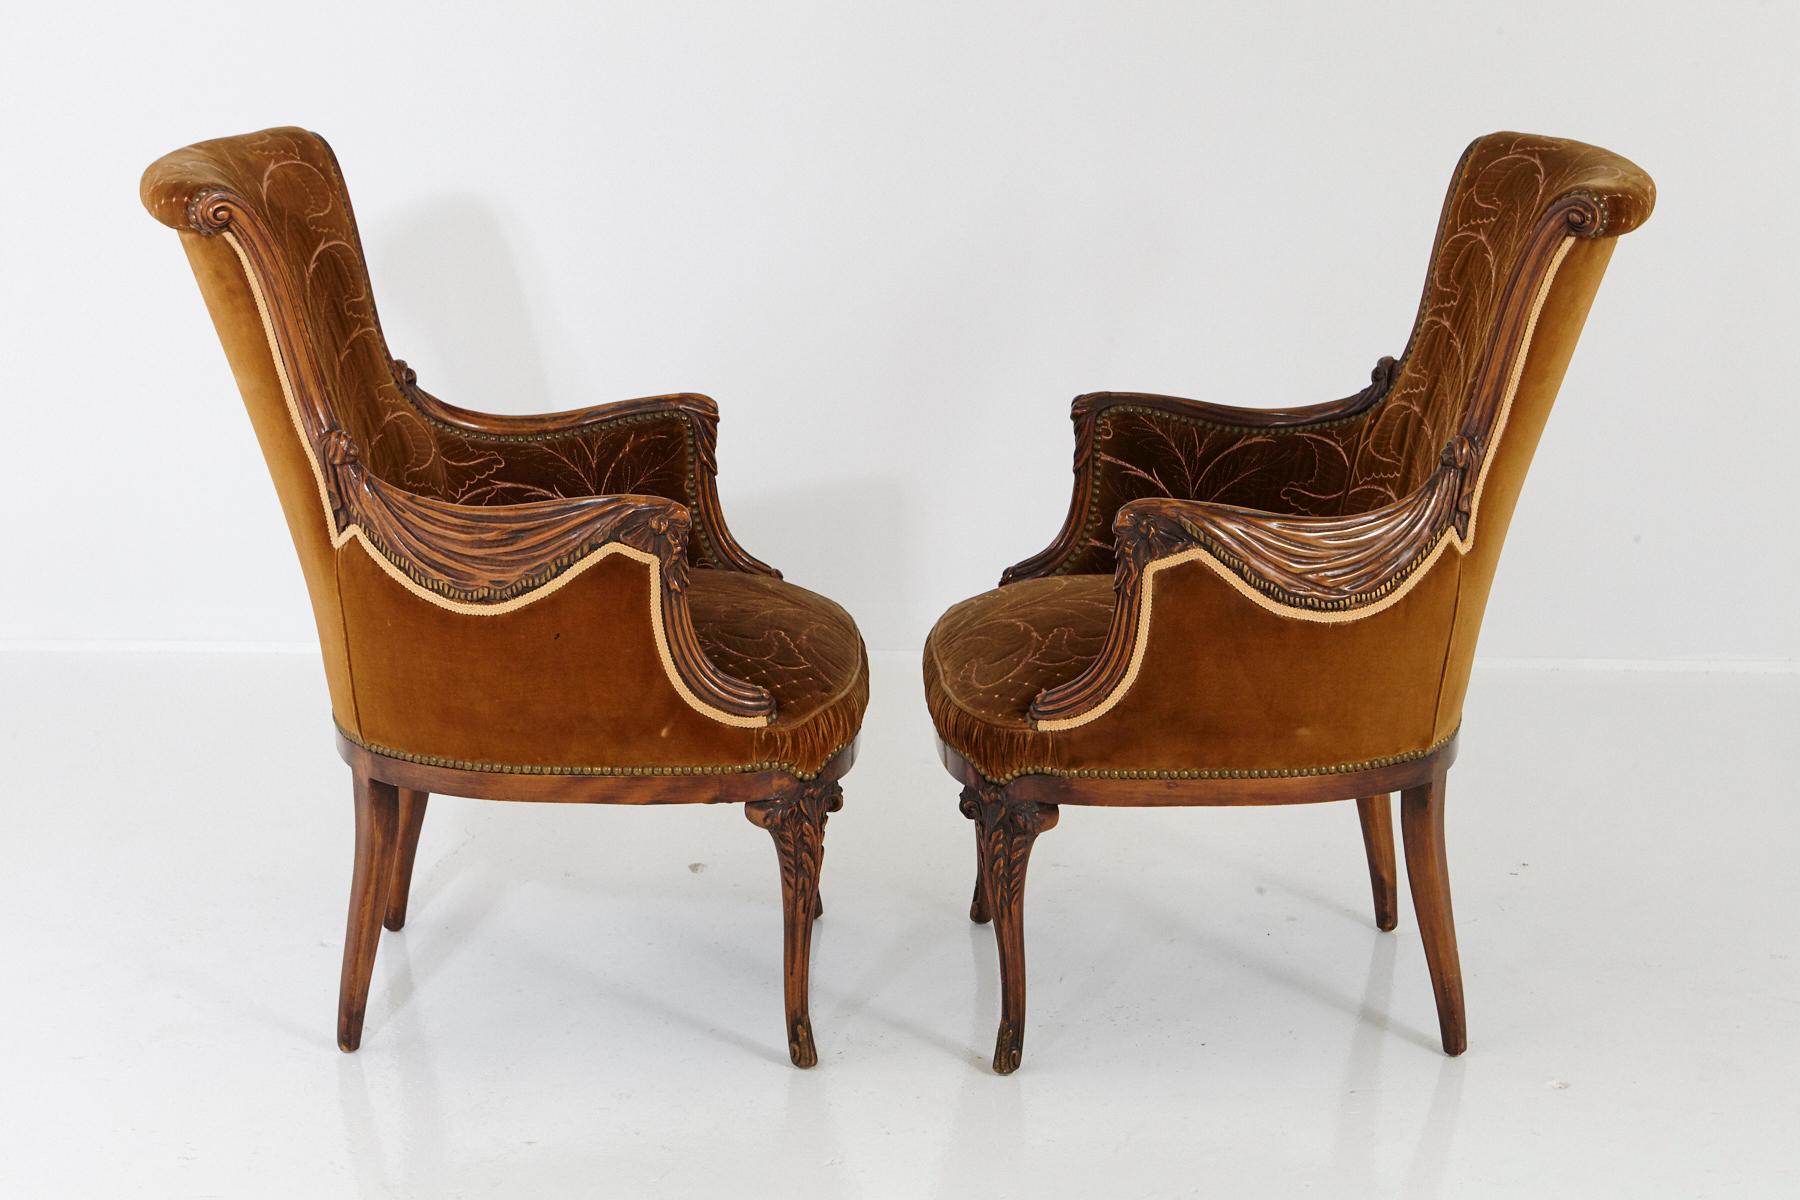 Pair of French Art Nouveau Armchairs, Two-Tone Cognac Colored Embroidered Velvet 11